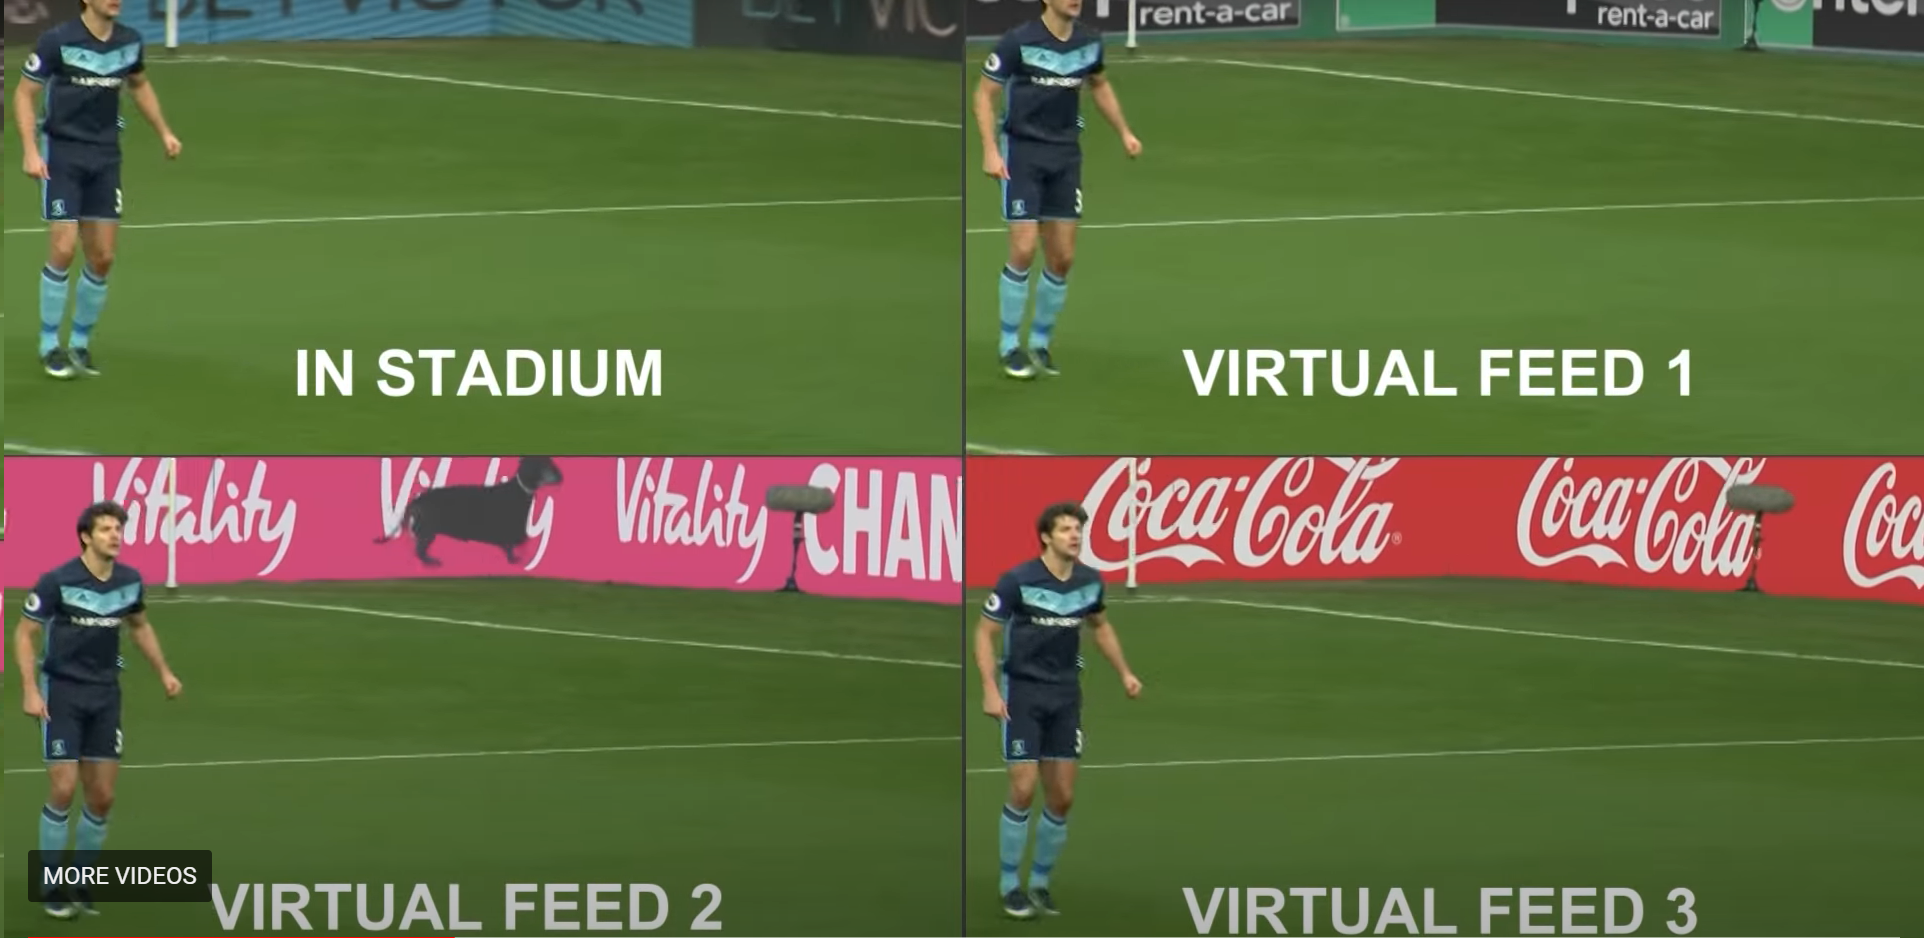 Football How do different channels show different touchline ads at the same moment?